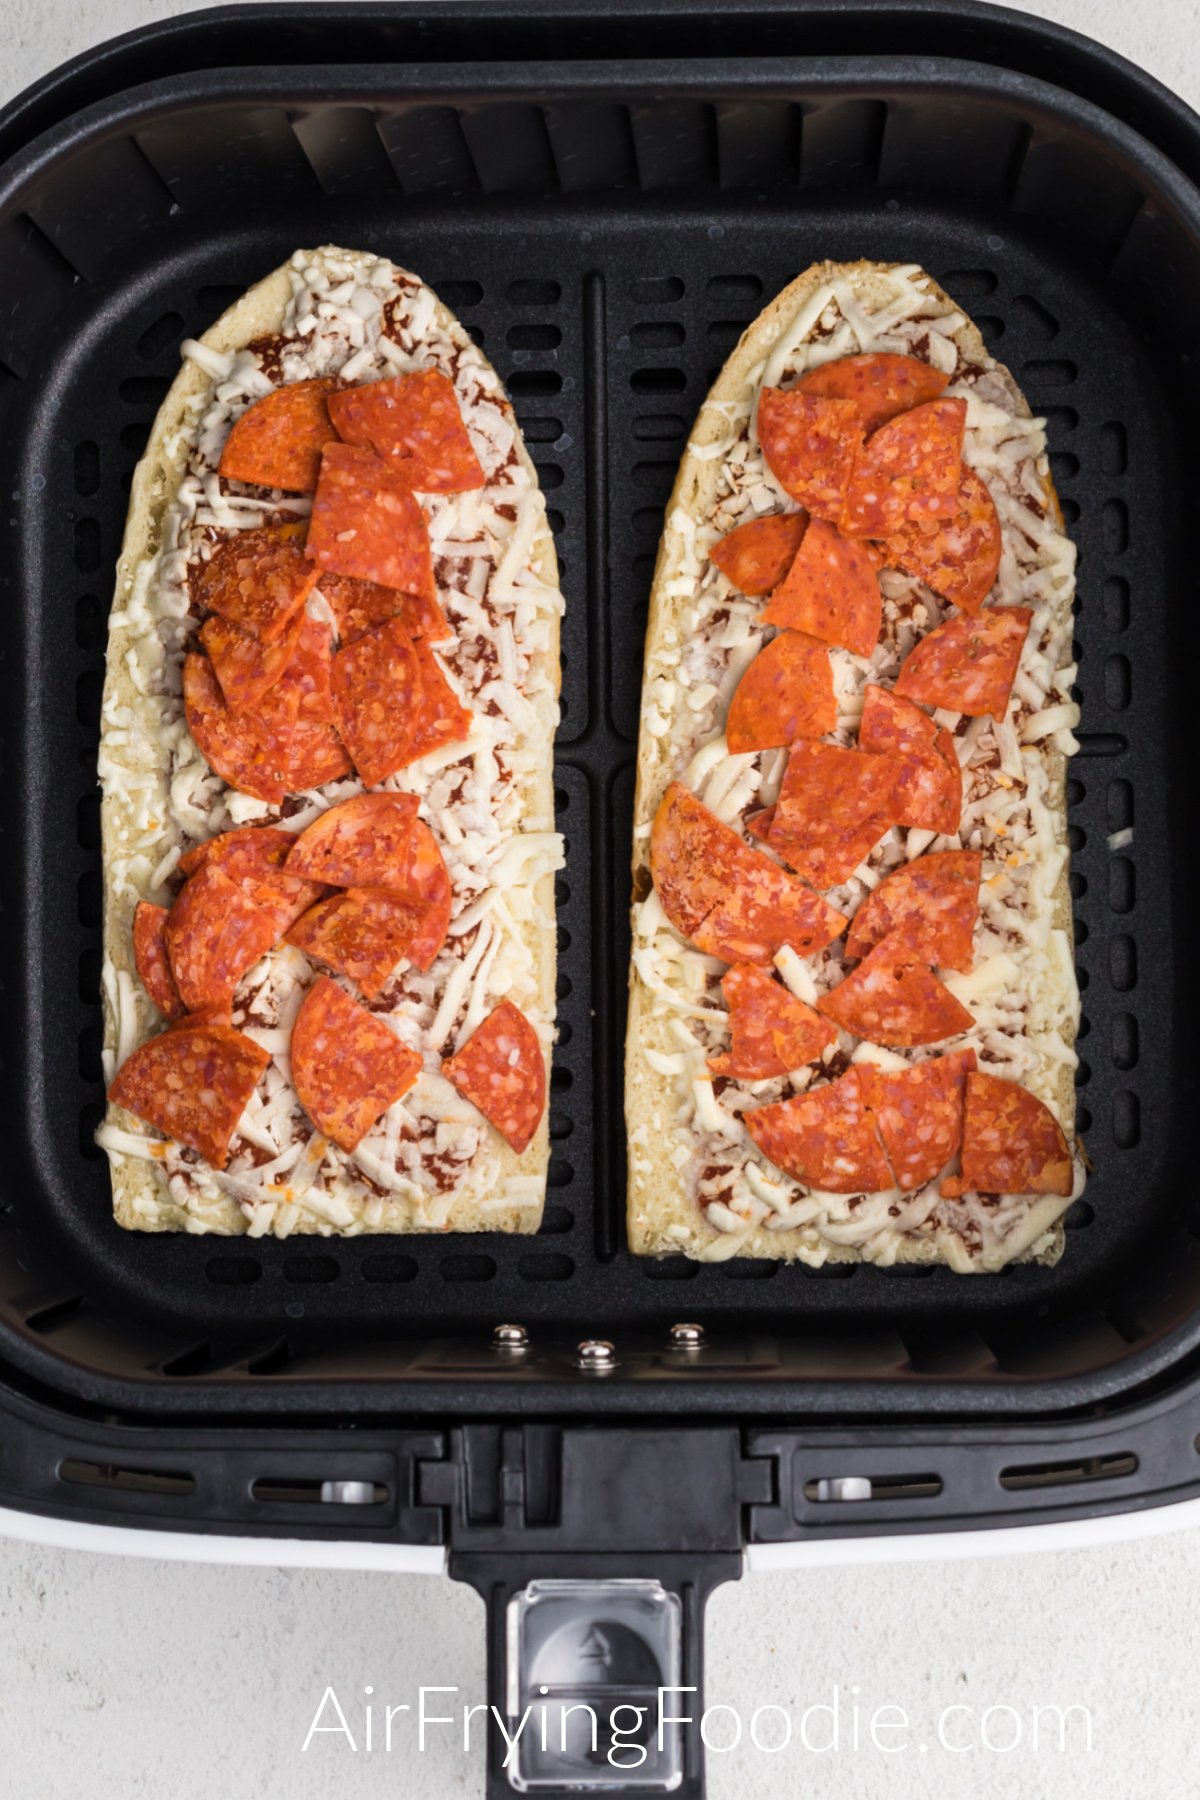 Frozen french bread pizzas in the basket of the air fryer.